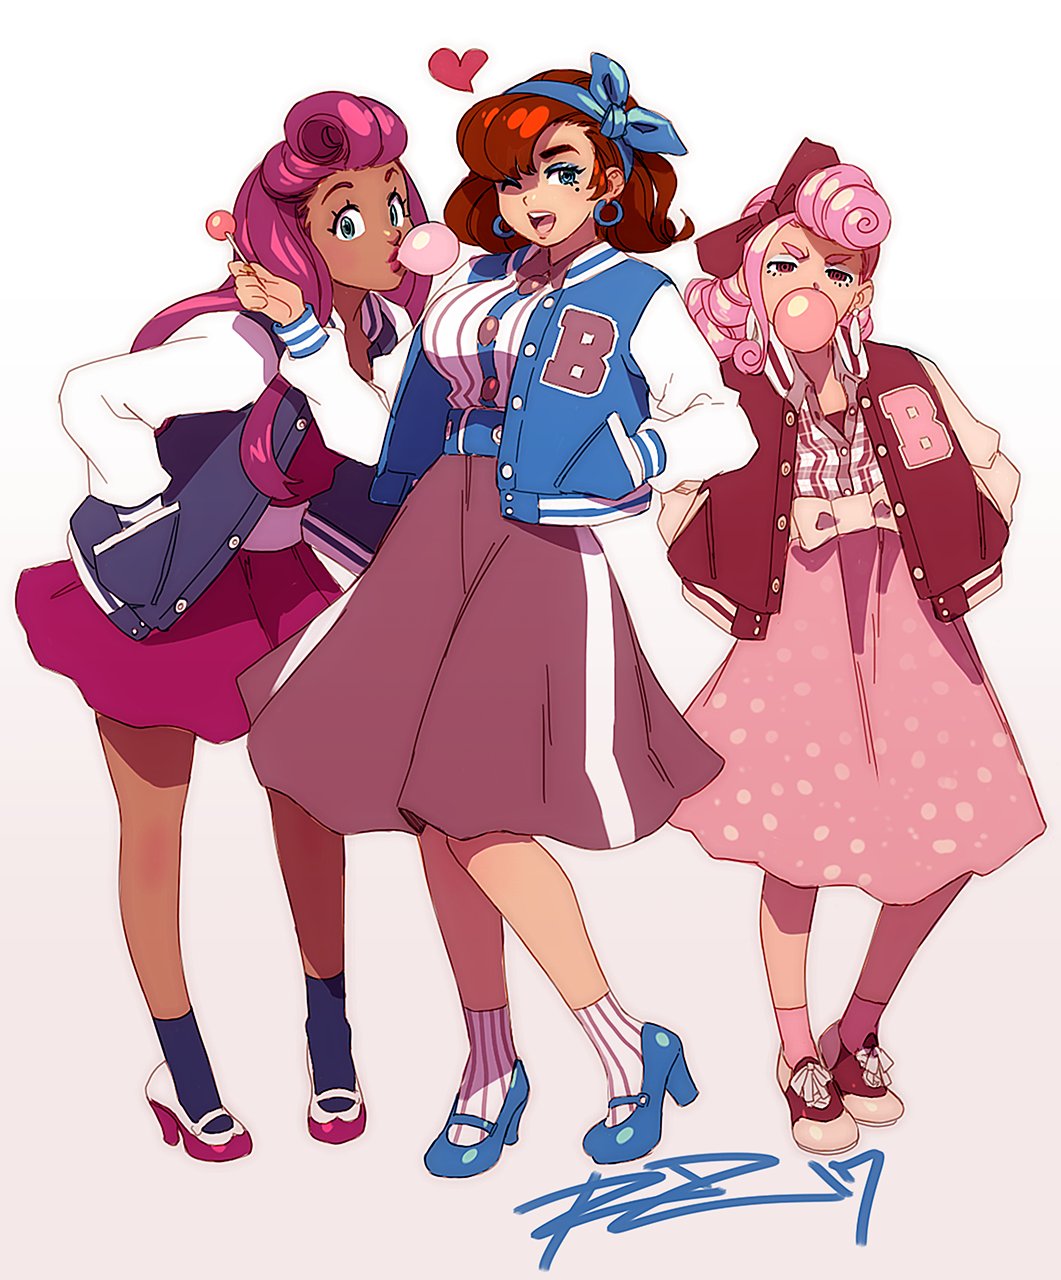 3girls ;d alternate_hairstyle bliss_barson blue_eyes bow breasts brown_hair bubble_blowing chewing_gum cryamore dark_skin deseret_amoir earrings eyeshadow flat_chest full_body hair_bow hairband hand_in_pocket highres hoop_earrings jacket jewelry large_breasts letterman_jacket lipstick long_skirt looking_at_viewer makeup mole mole_under_eye multiple_girls one_eye_closed open_mouth pink_hair pumps purple_hair robert_porter signature skirt smile socks sorbet_la_carelle standing very_dark_skin